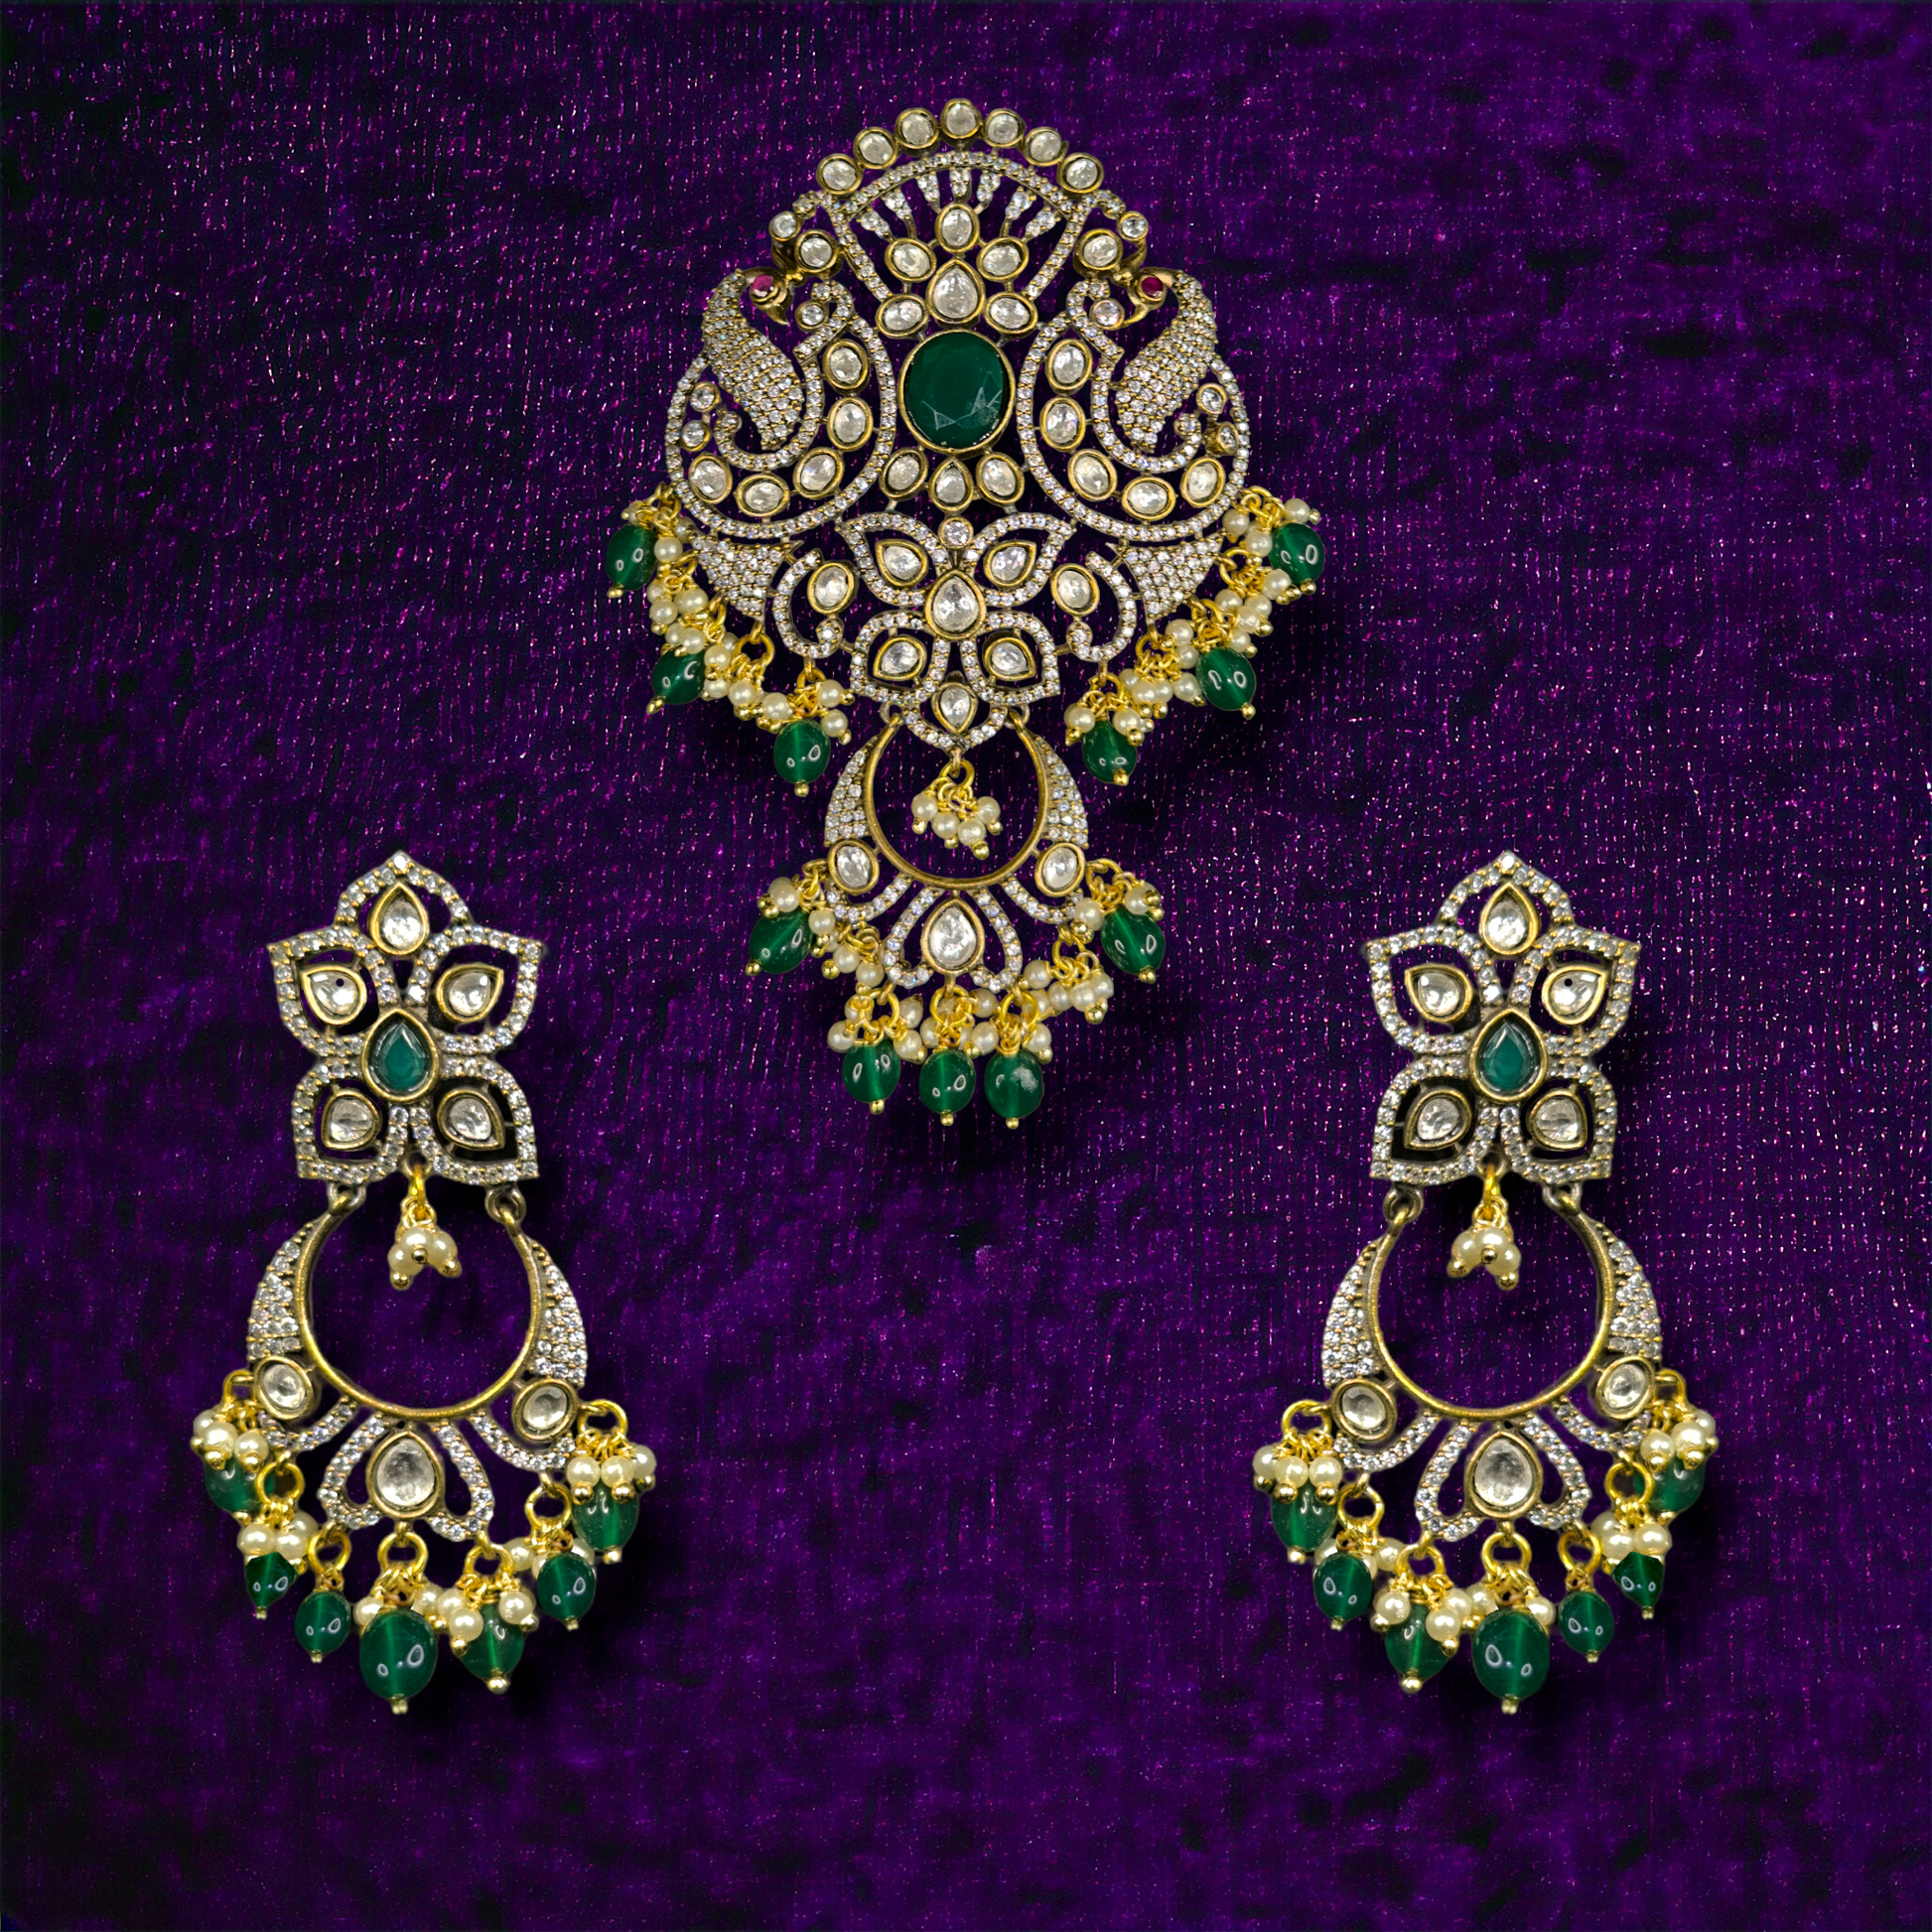 Heritage Victorian Pendant with Peacock motif and Earrings. This Victorian Jewellery is available in a Green colour variant. 